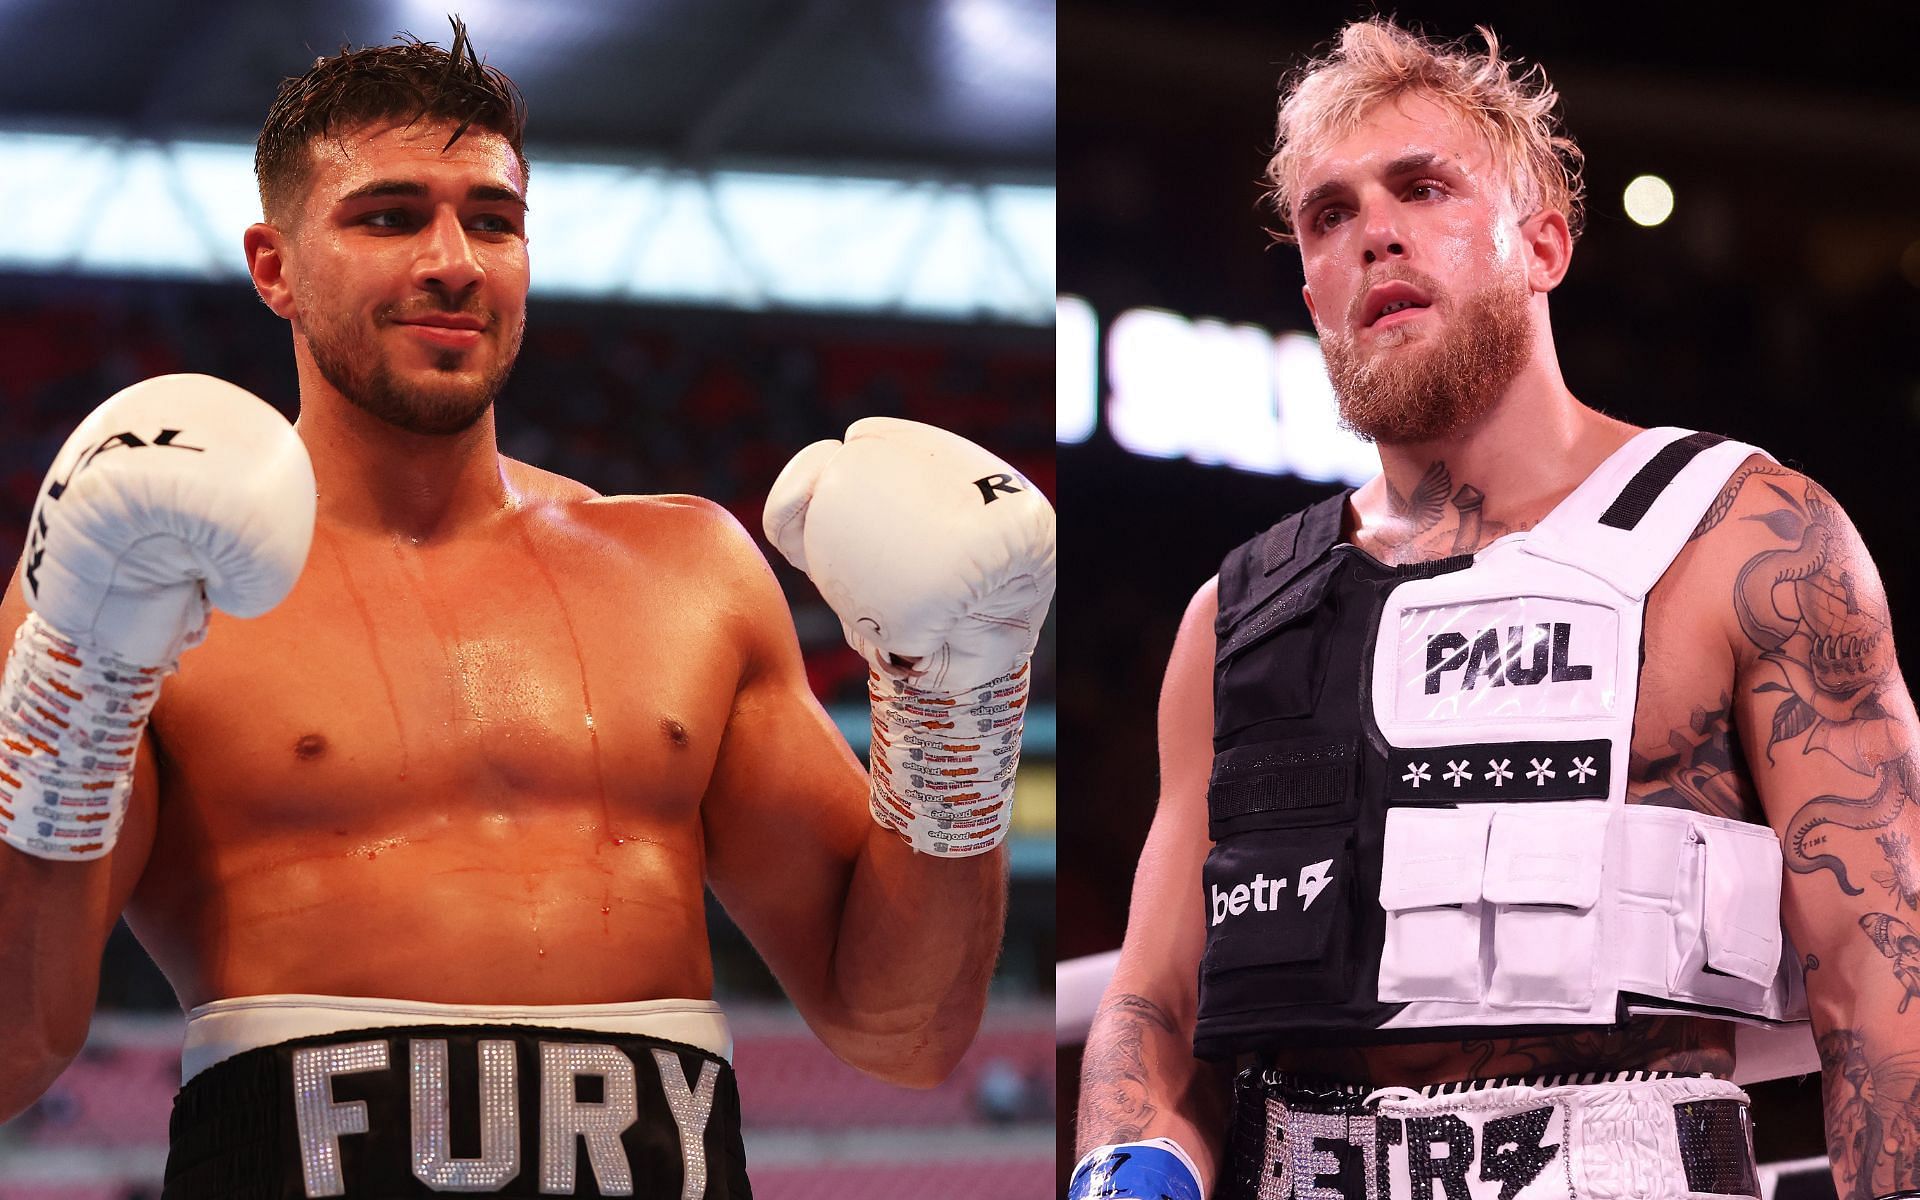 Tommy Fury (left) and Jake Paul (right). [Images courtesy: Getty Images]